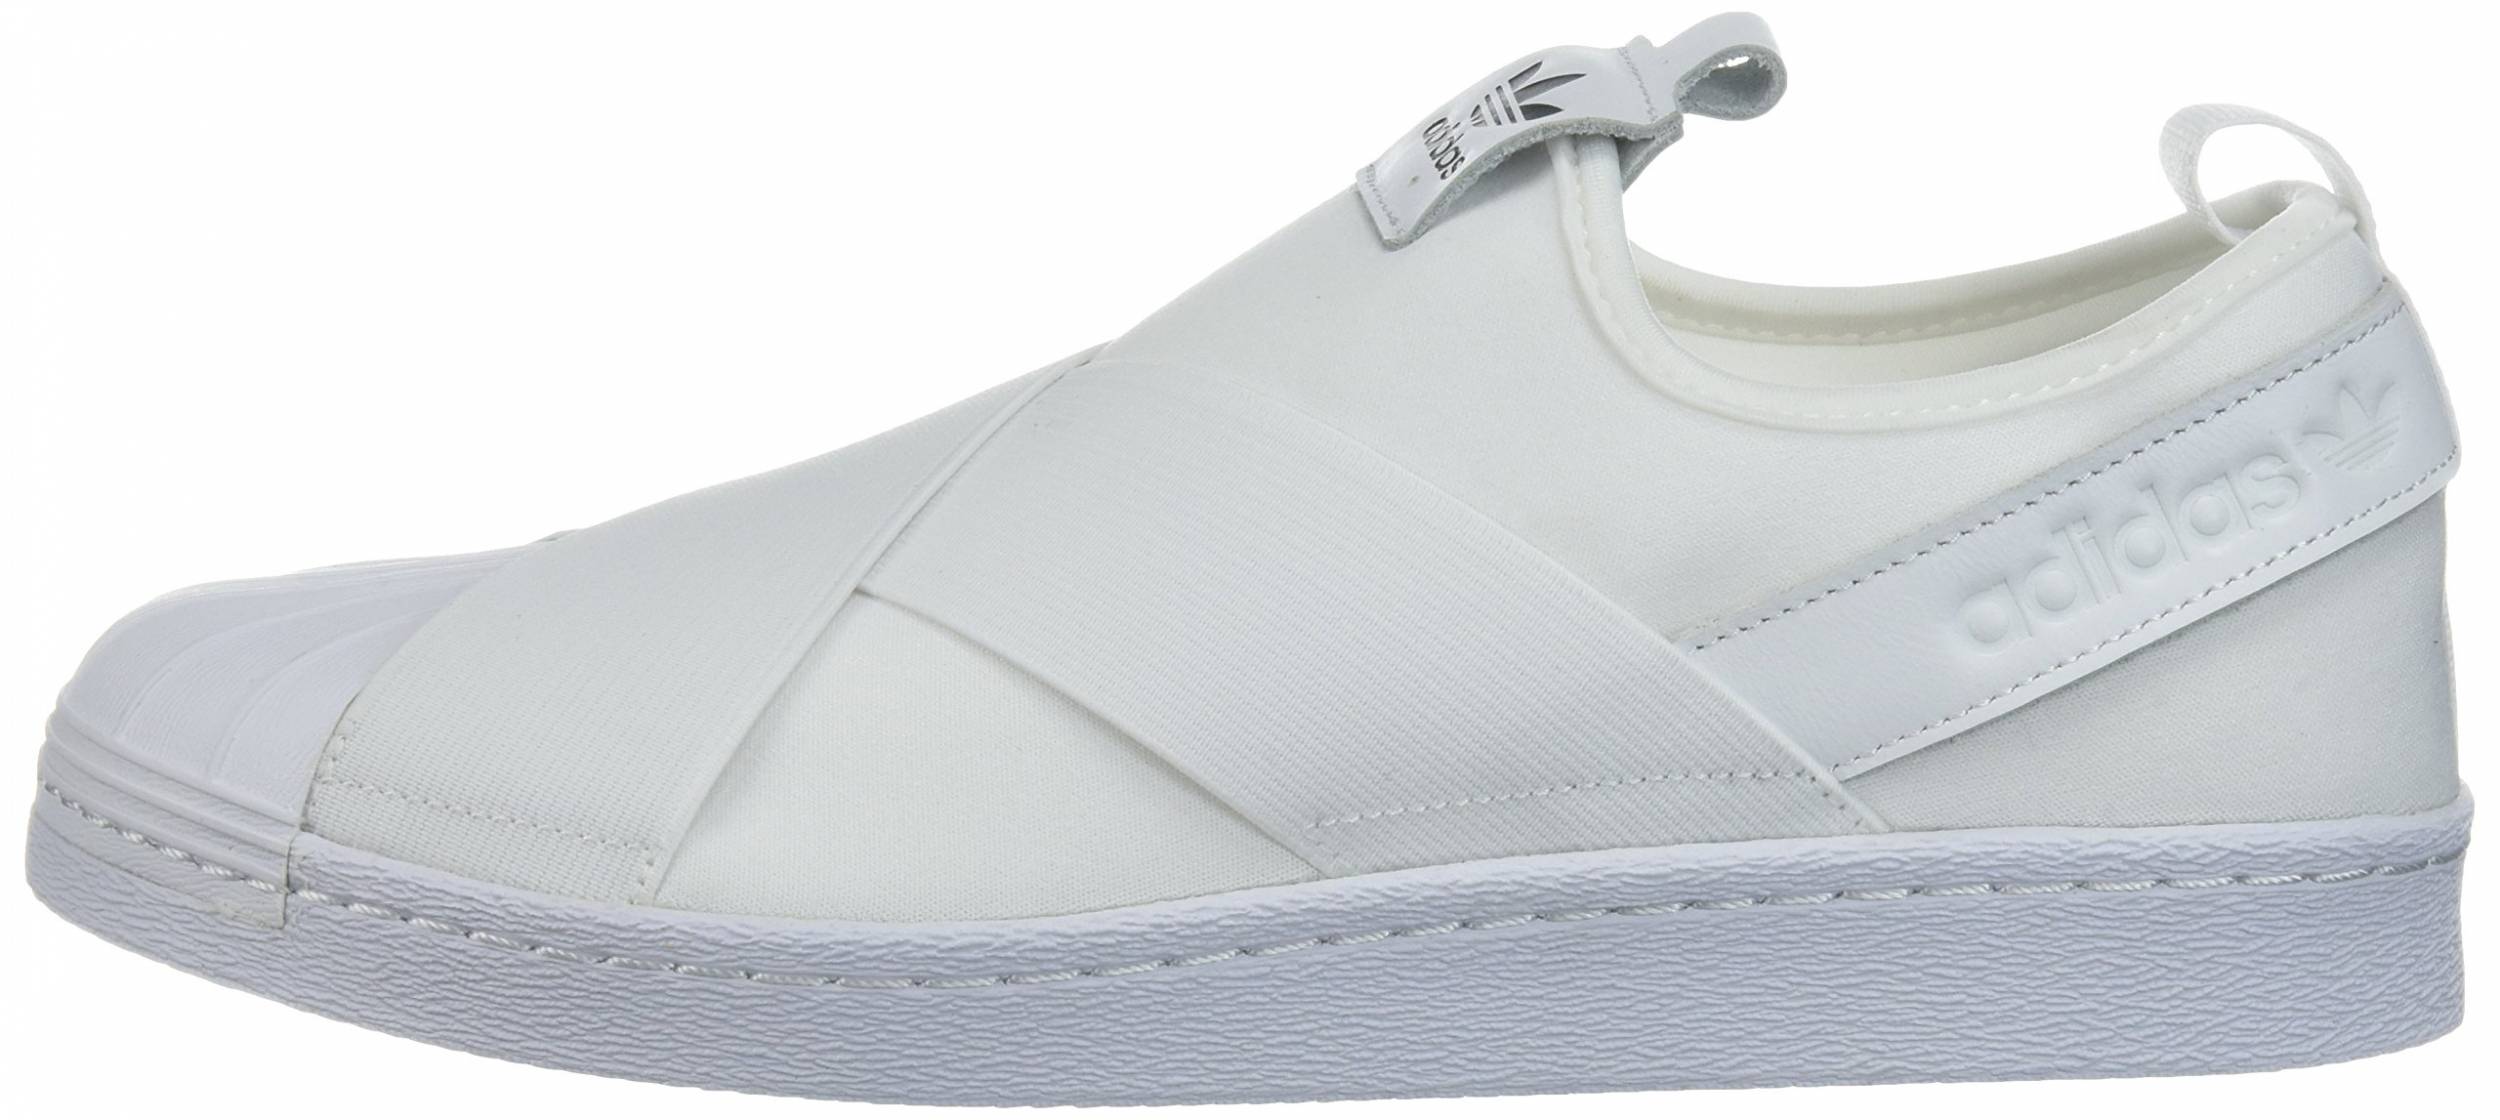 Adidas Superstar Slip-On sneakers in 4 colors (only $53) | RunRepeat